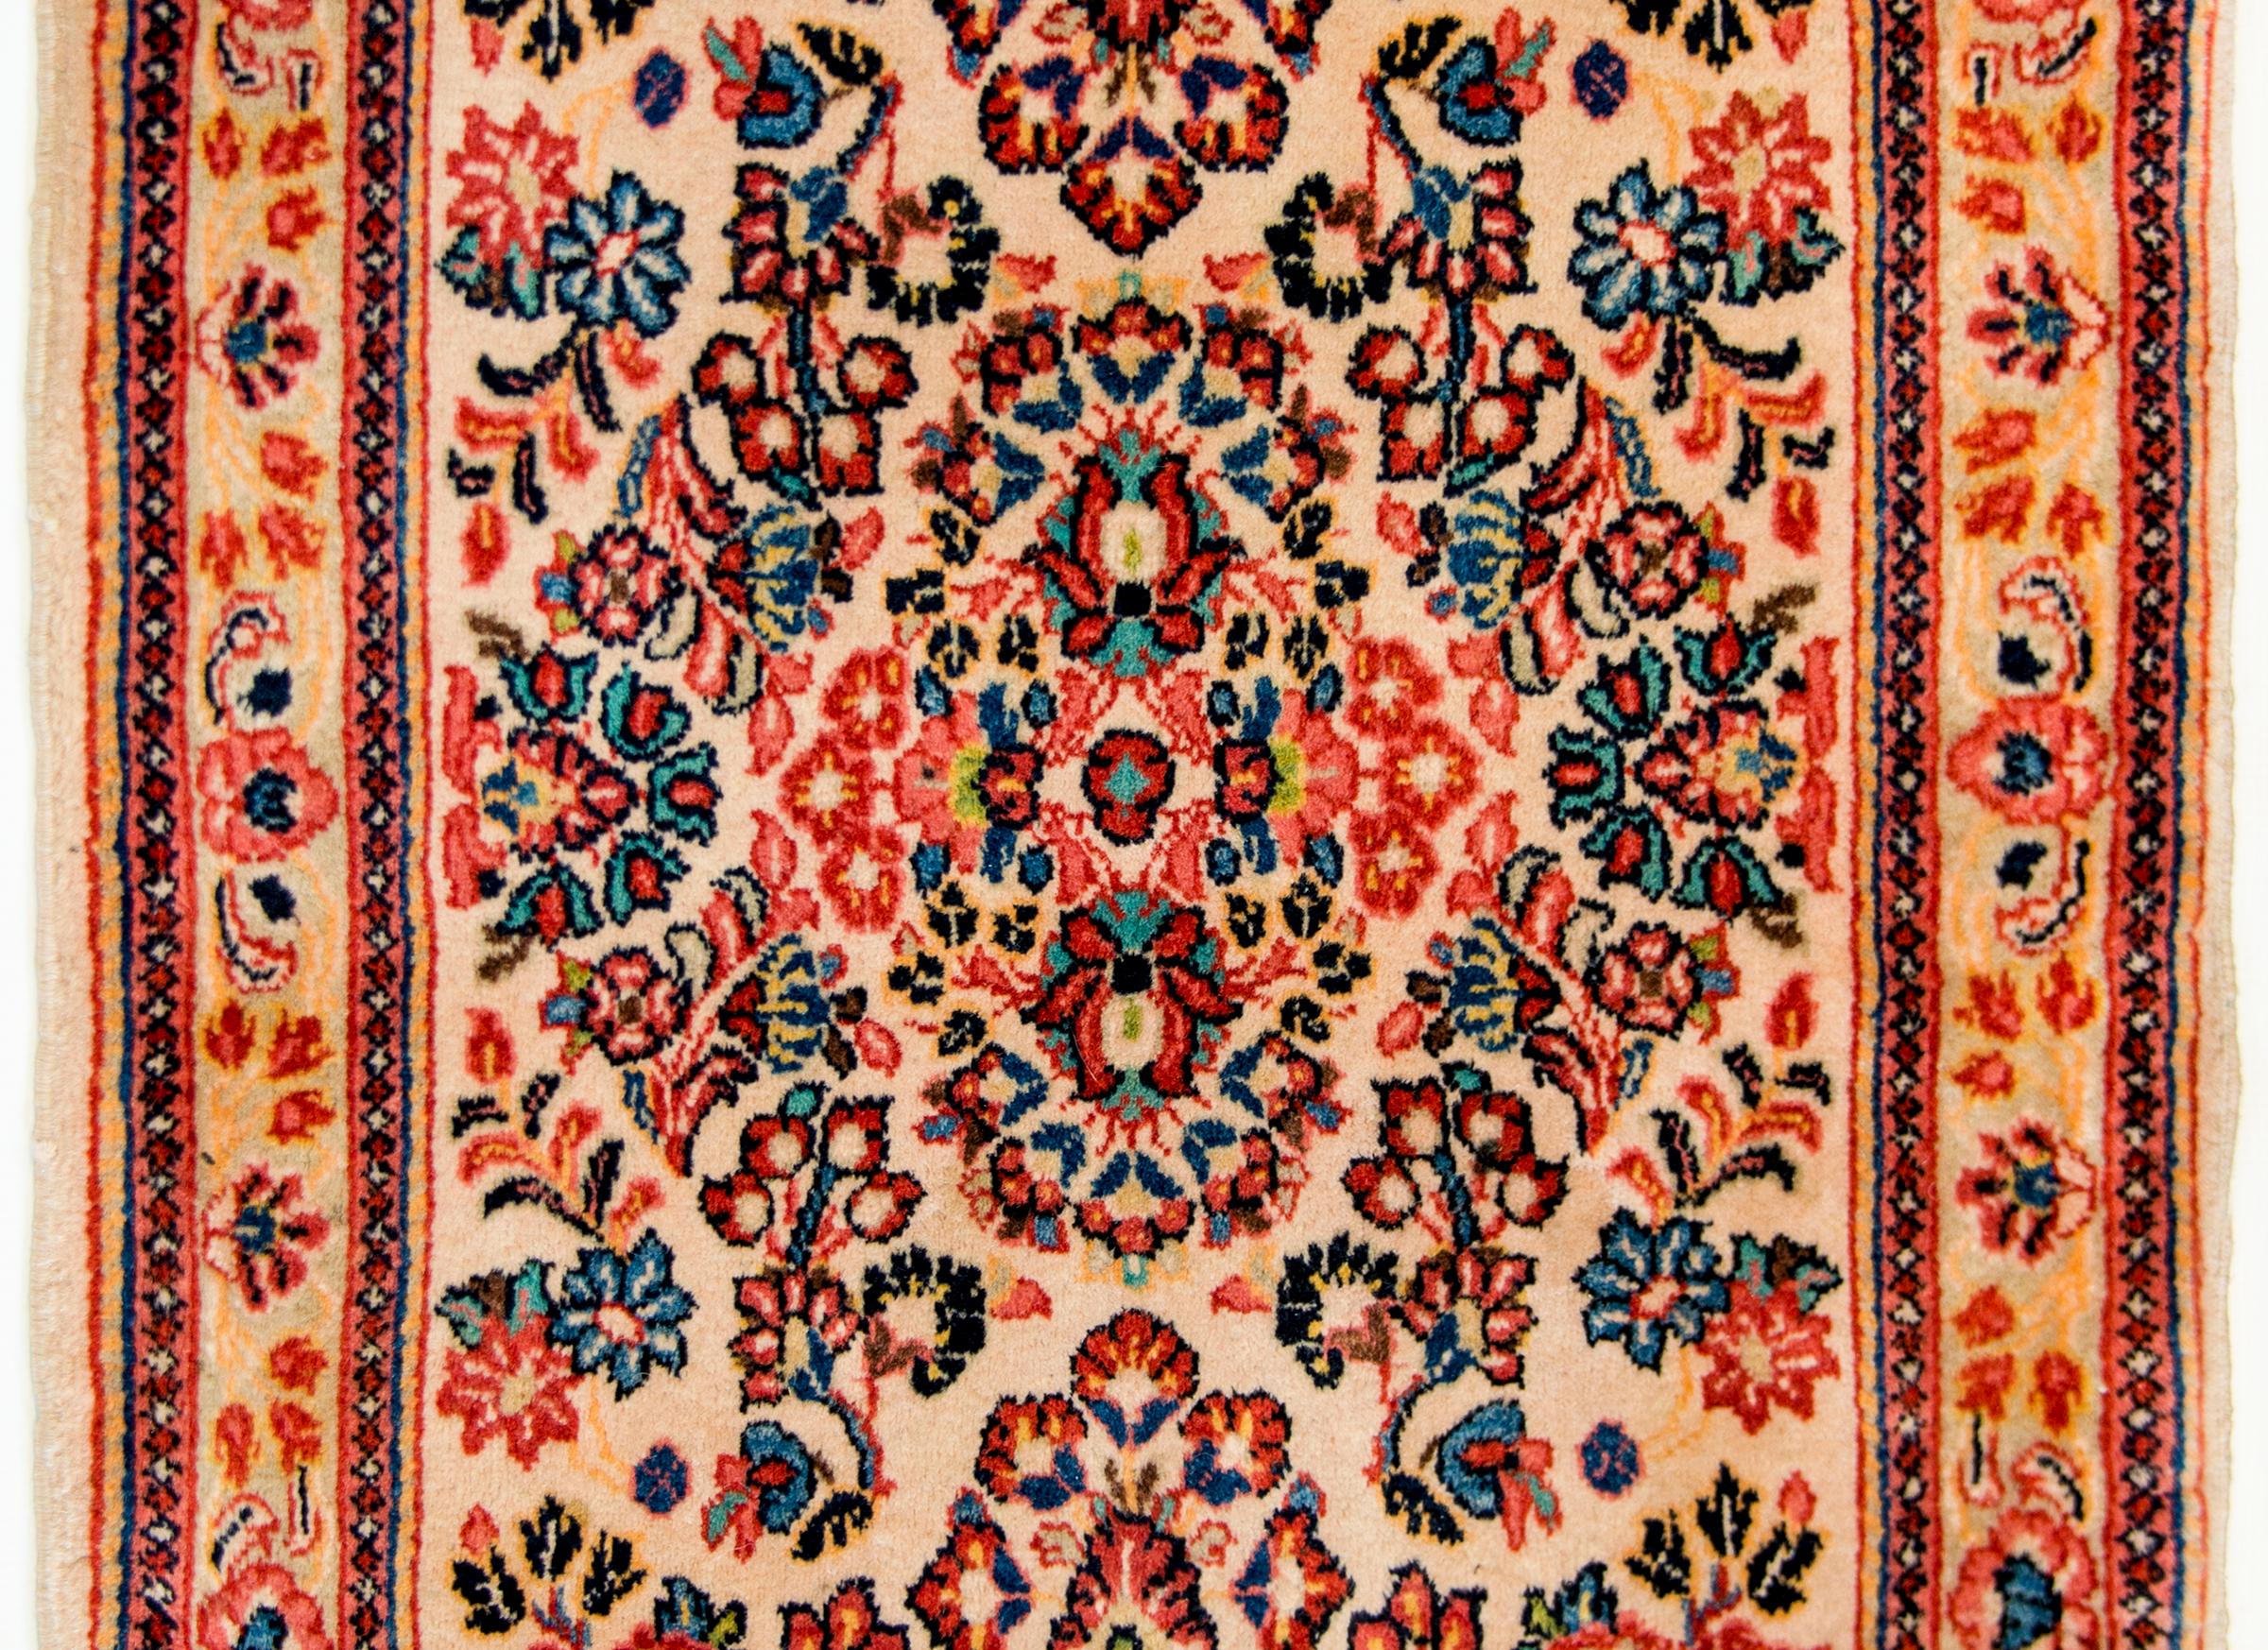 An early 20th century Persian Sarouk rug with an all-over mirrored multicolored pattern with myriad flowers woven in dark and light indigo, crimson, and gold on a white background. The border is composed of a wide floral patterned stripe flanked by